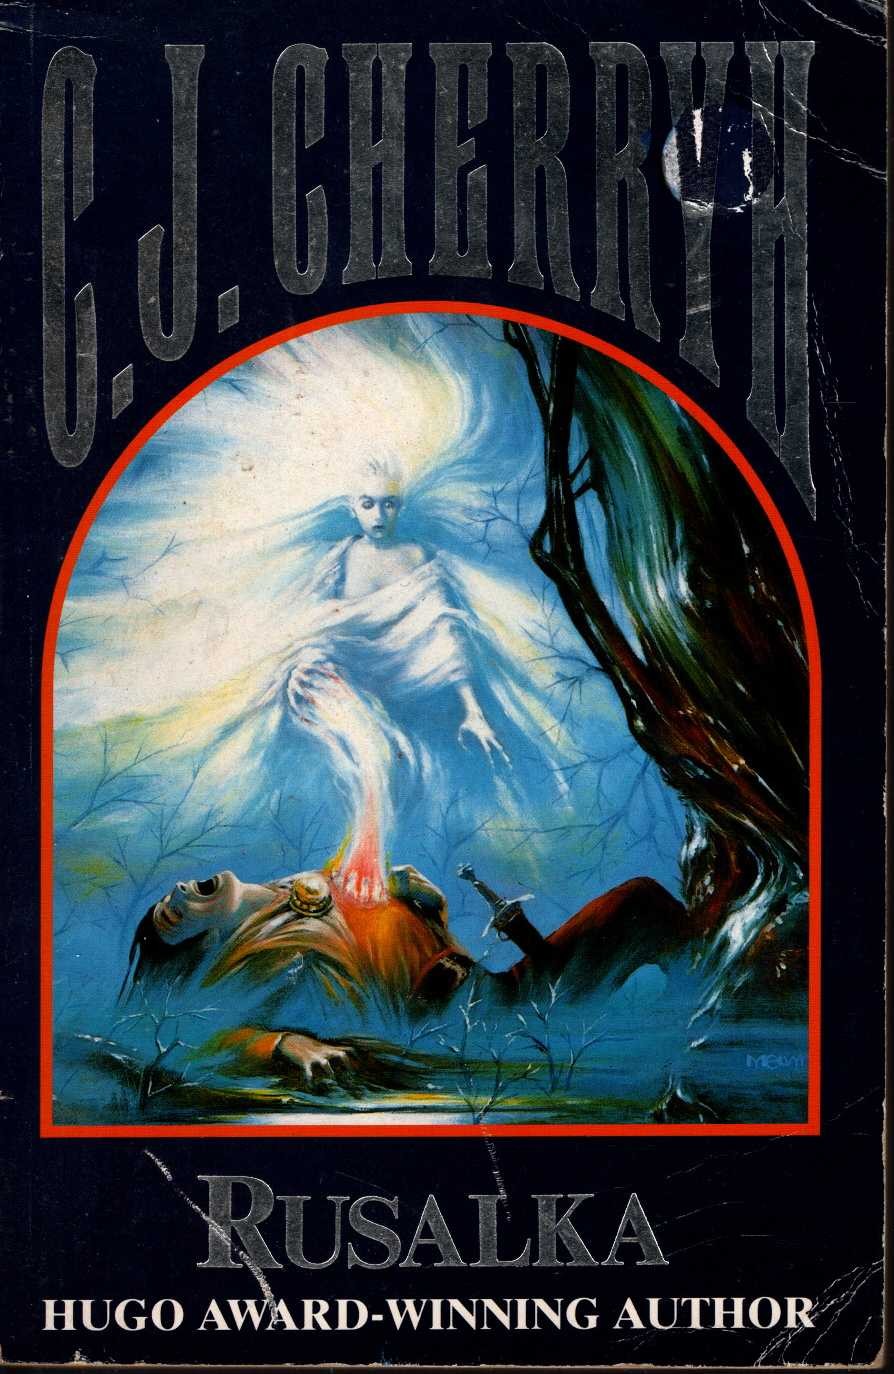 C.J. Cherryh  RUSALKA front book cover image